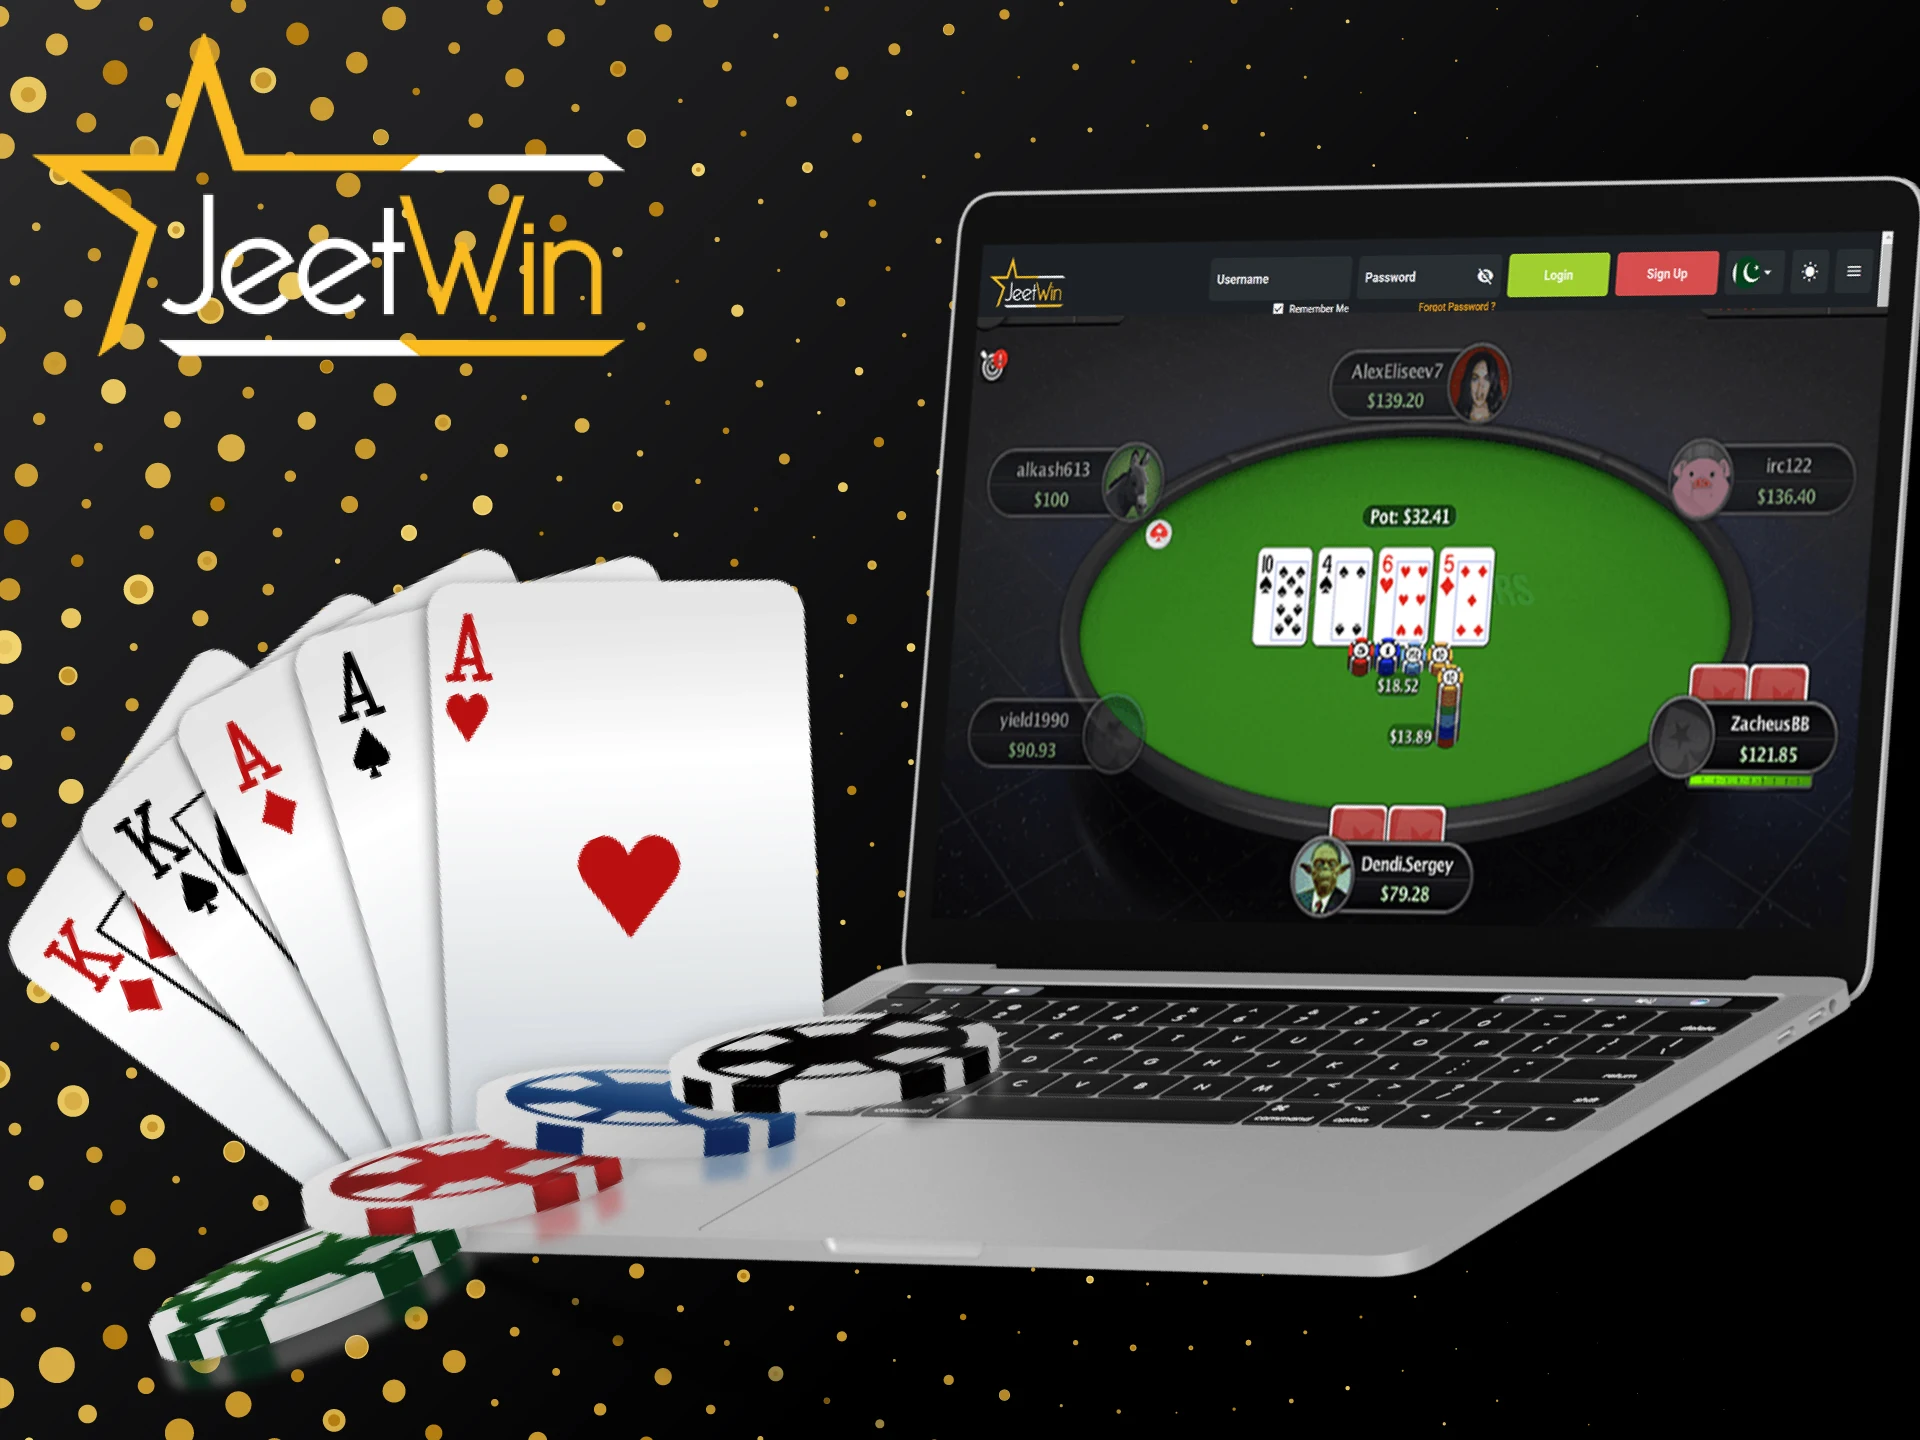 Try your luck and strategic skills playing Hold'em with JeetWin.